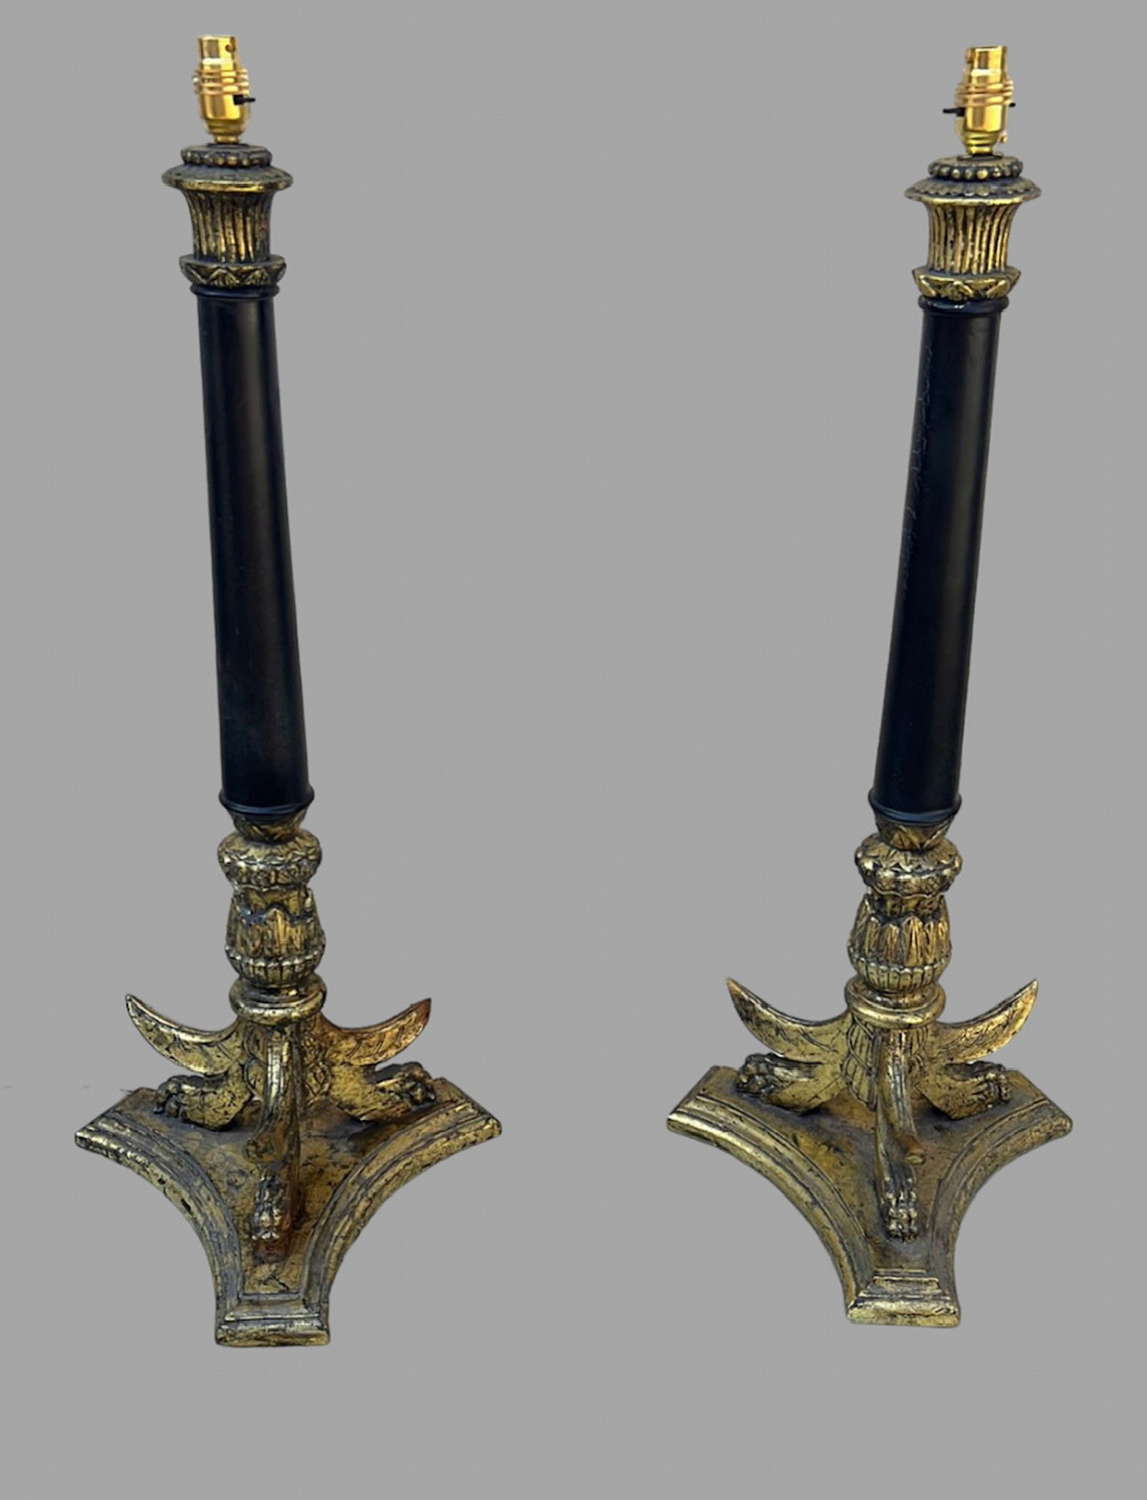 A Pair of Black and Gilded Table Lamps